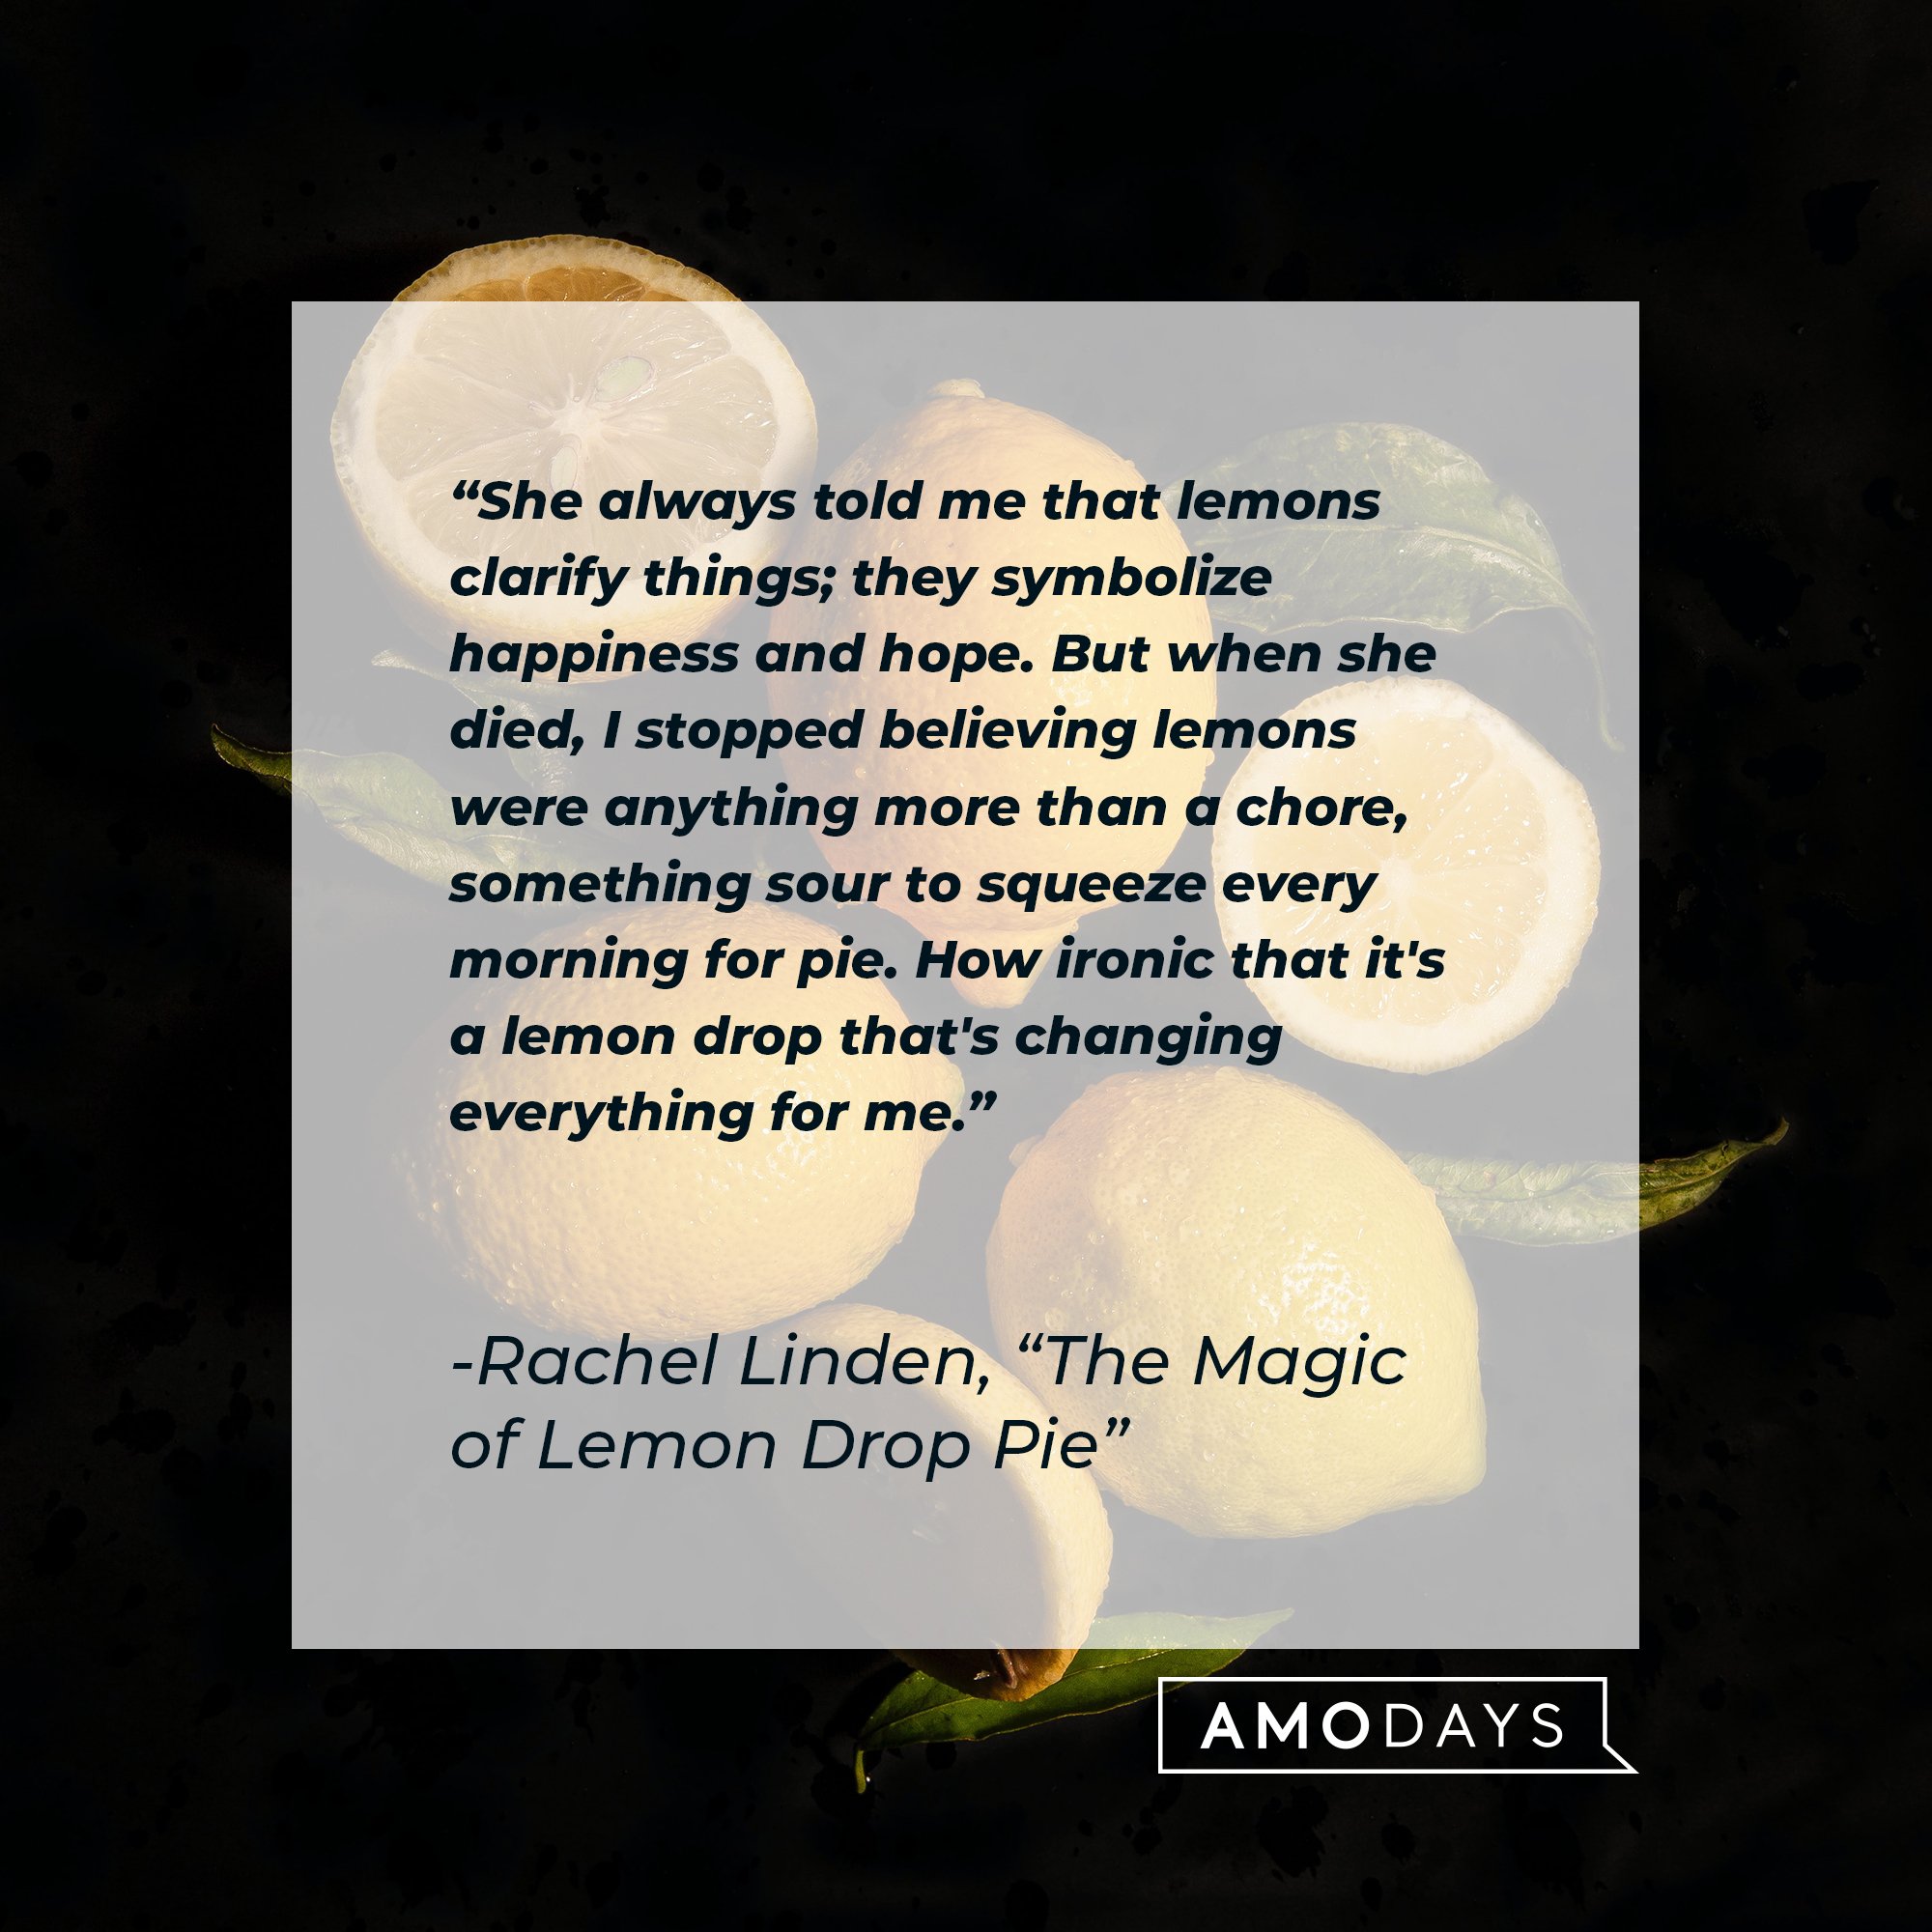 Rachel Linden's quote from “The Magic of Lemon Drop Pie”: "She always told me that lemons clarify things; they symbolize happiness and hope. But when she died, I stopped believing lemons were anything more than a chore, something sour to squeeze everyIn all my work, I try to say - 'You may be given a load of sour lemons, why not try to make a dozen lemon meringue pies?' | Image: AmoDays   